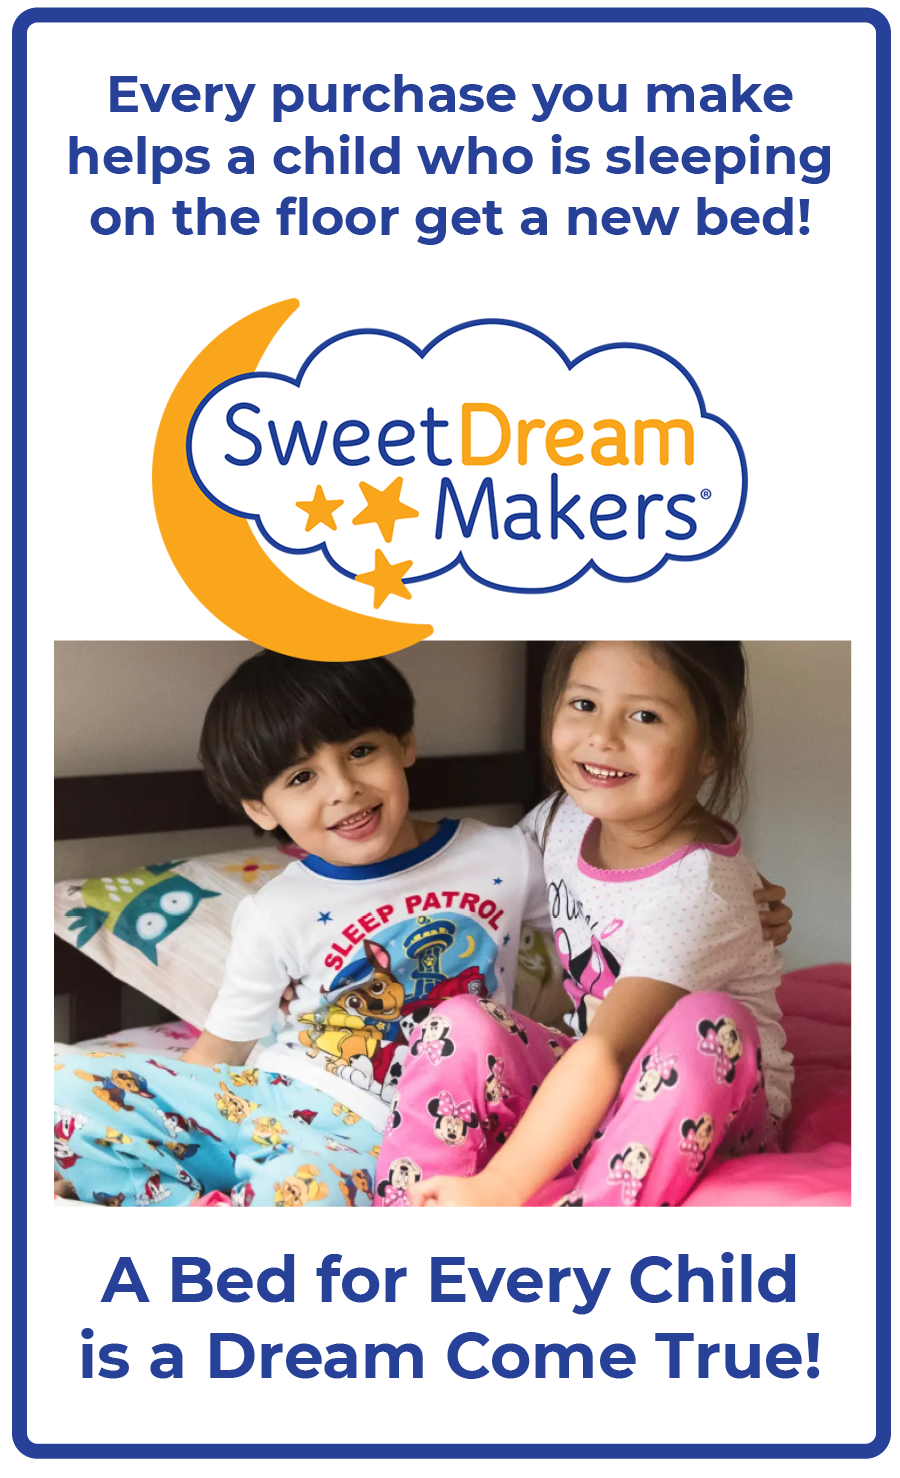 Every purchase helps SweetDreamMakers